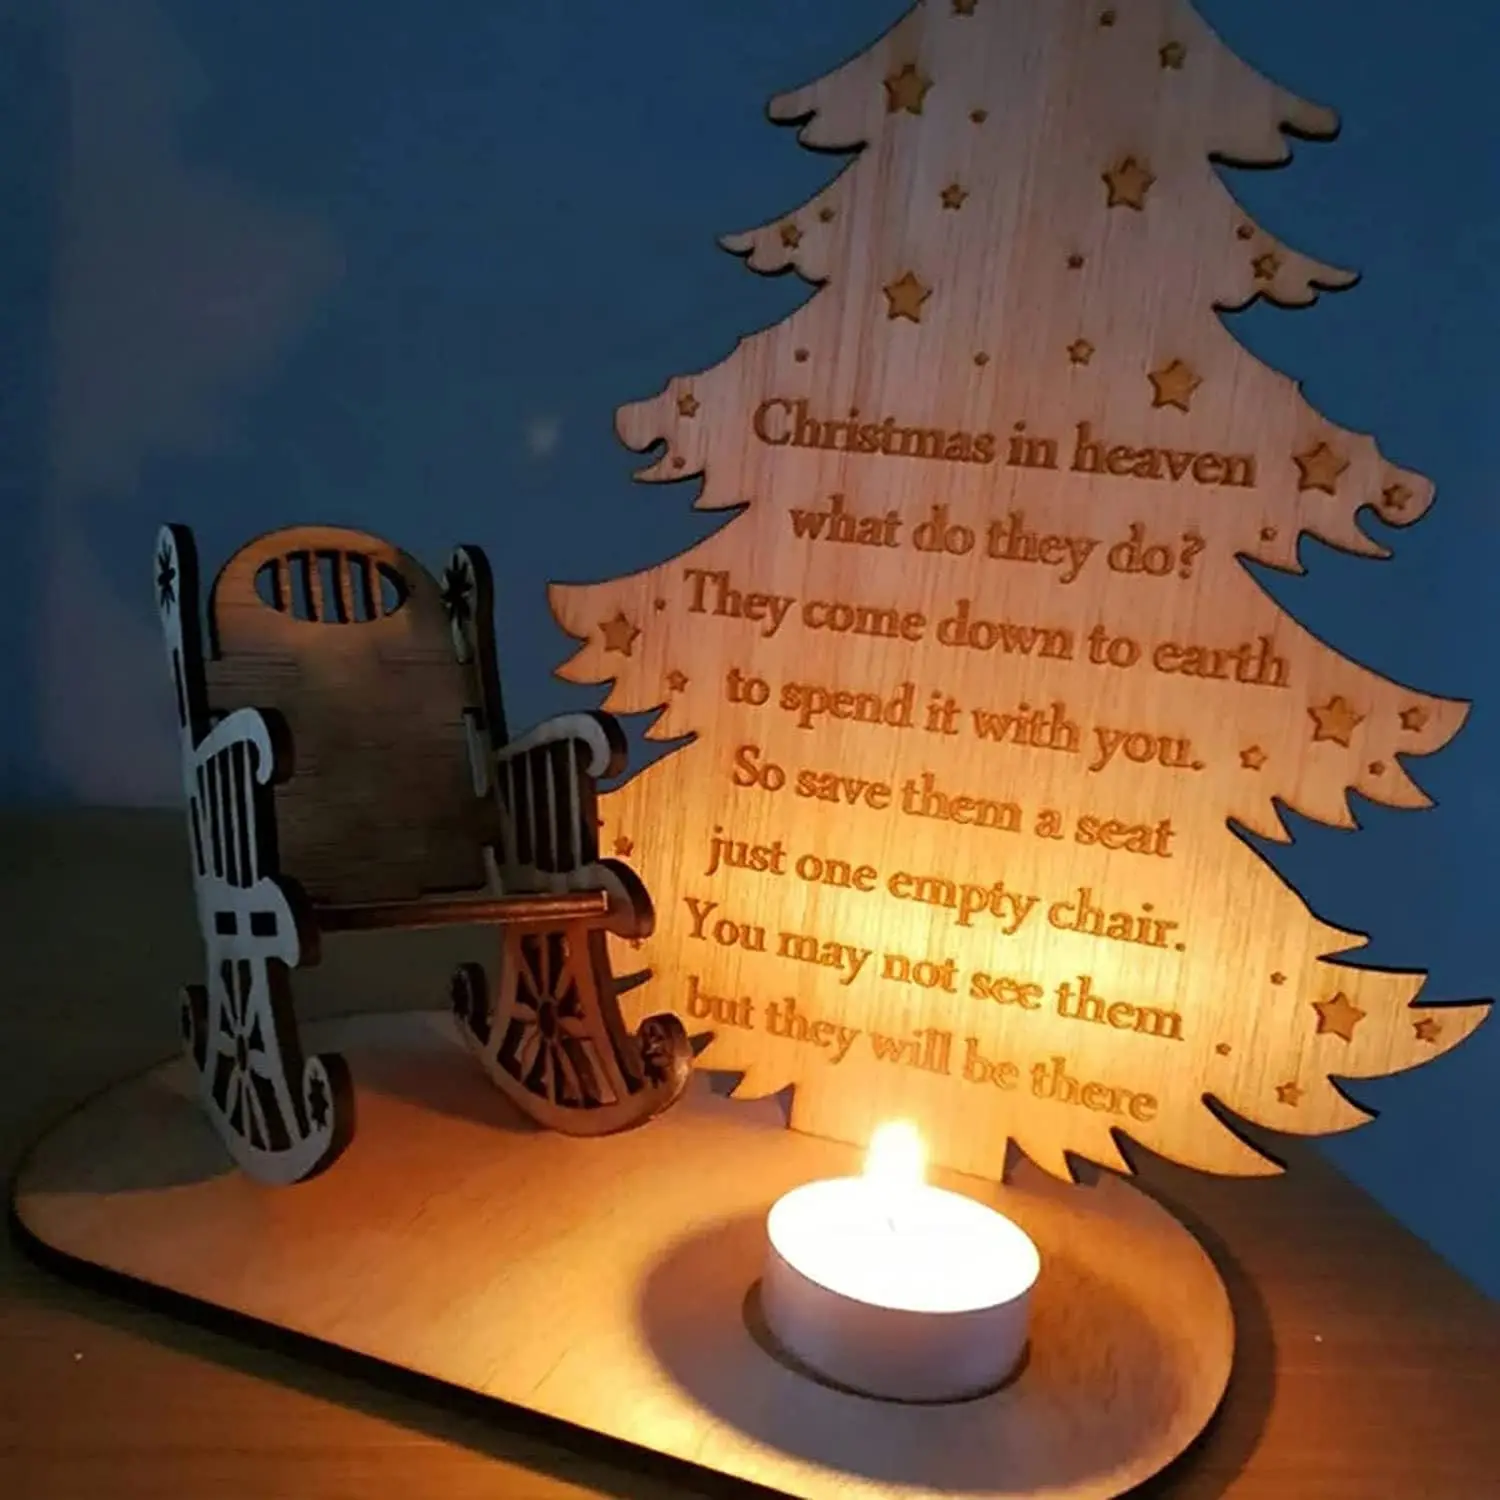 Christmas Remembrance Candle Ornament to Remember Loved Ones,Merry Christmas in Heaven Memory Tealight Candlestick Holders